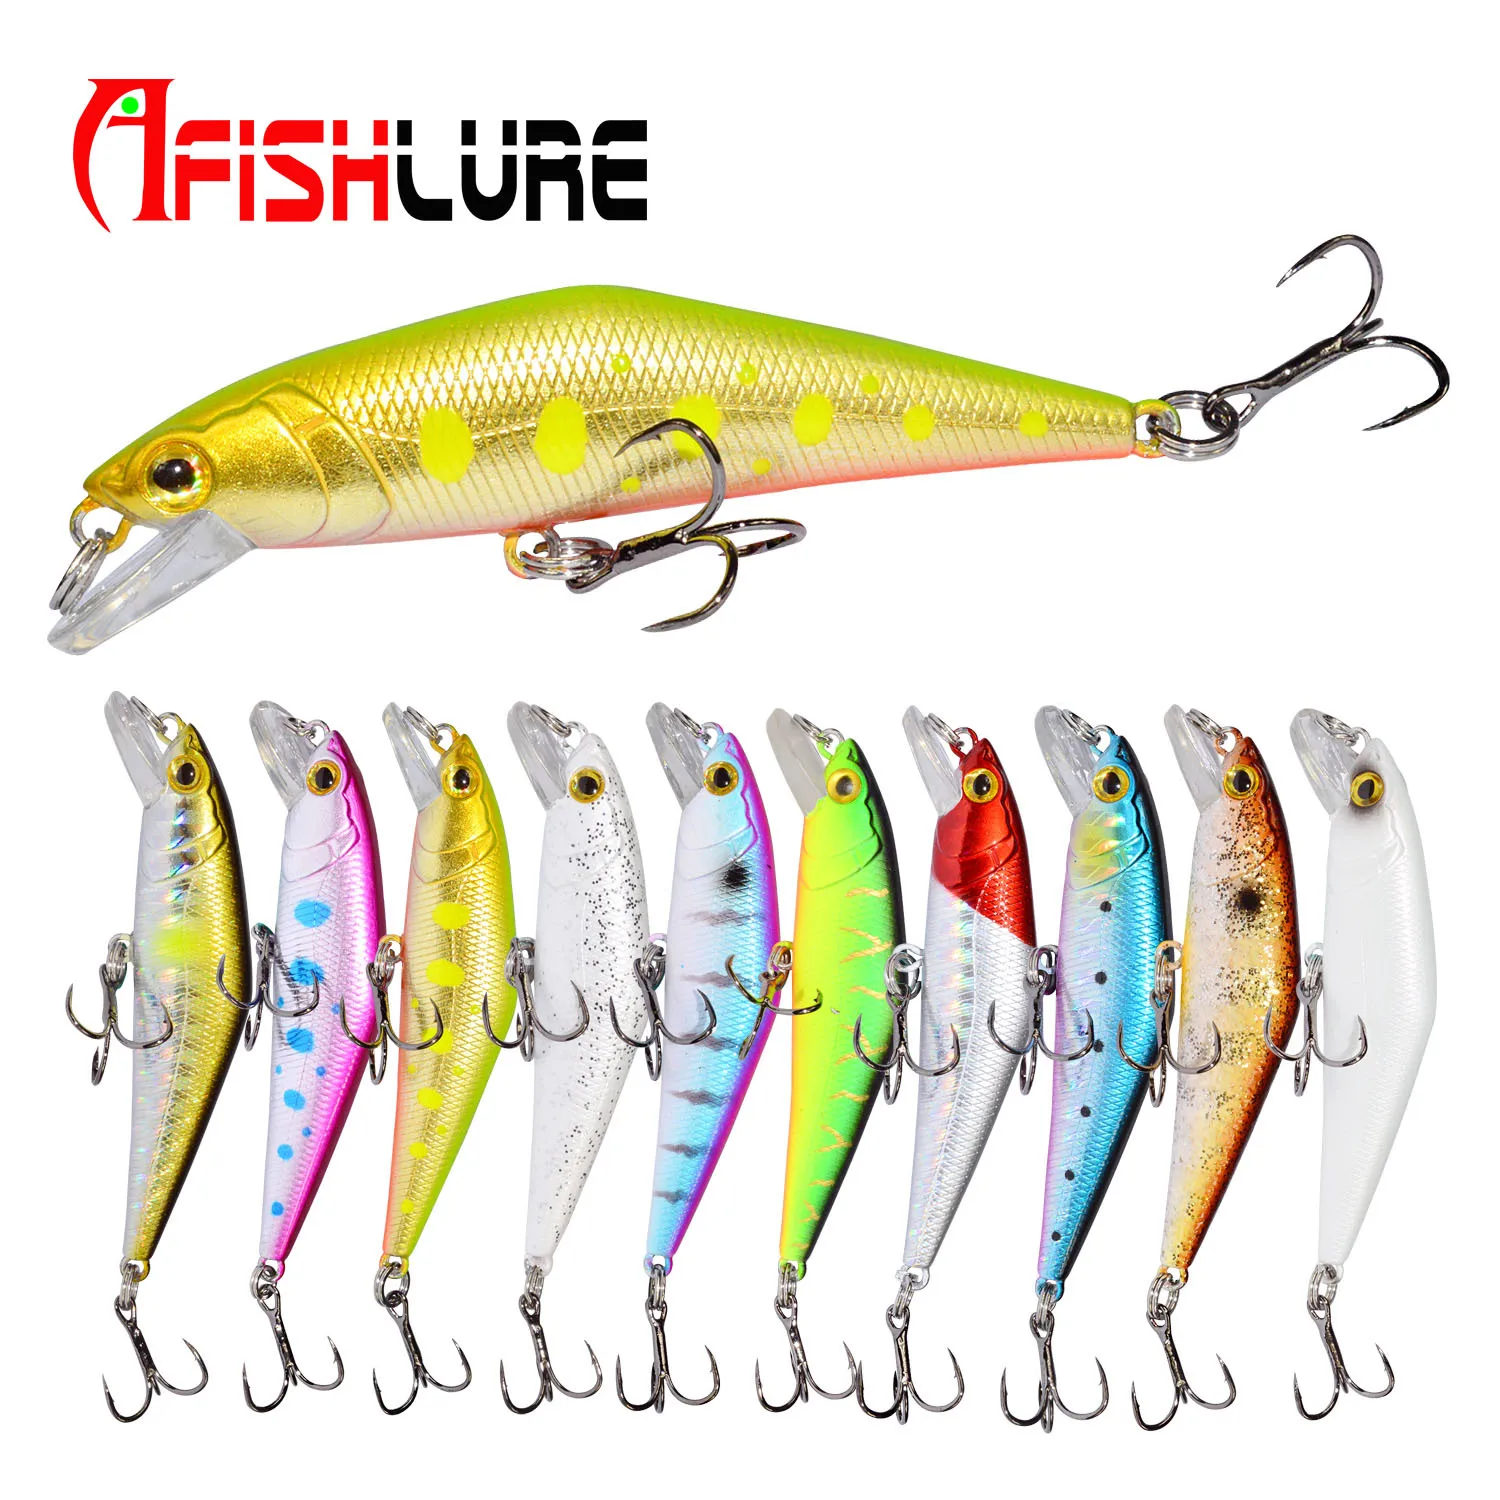 

Afishlure 66mm/8g D Contact Minnow Lures Sinking Hard Baits Iscas Artificial Pesca Leurre Dur Peche Lure Fishing ABS Hard Lure